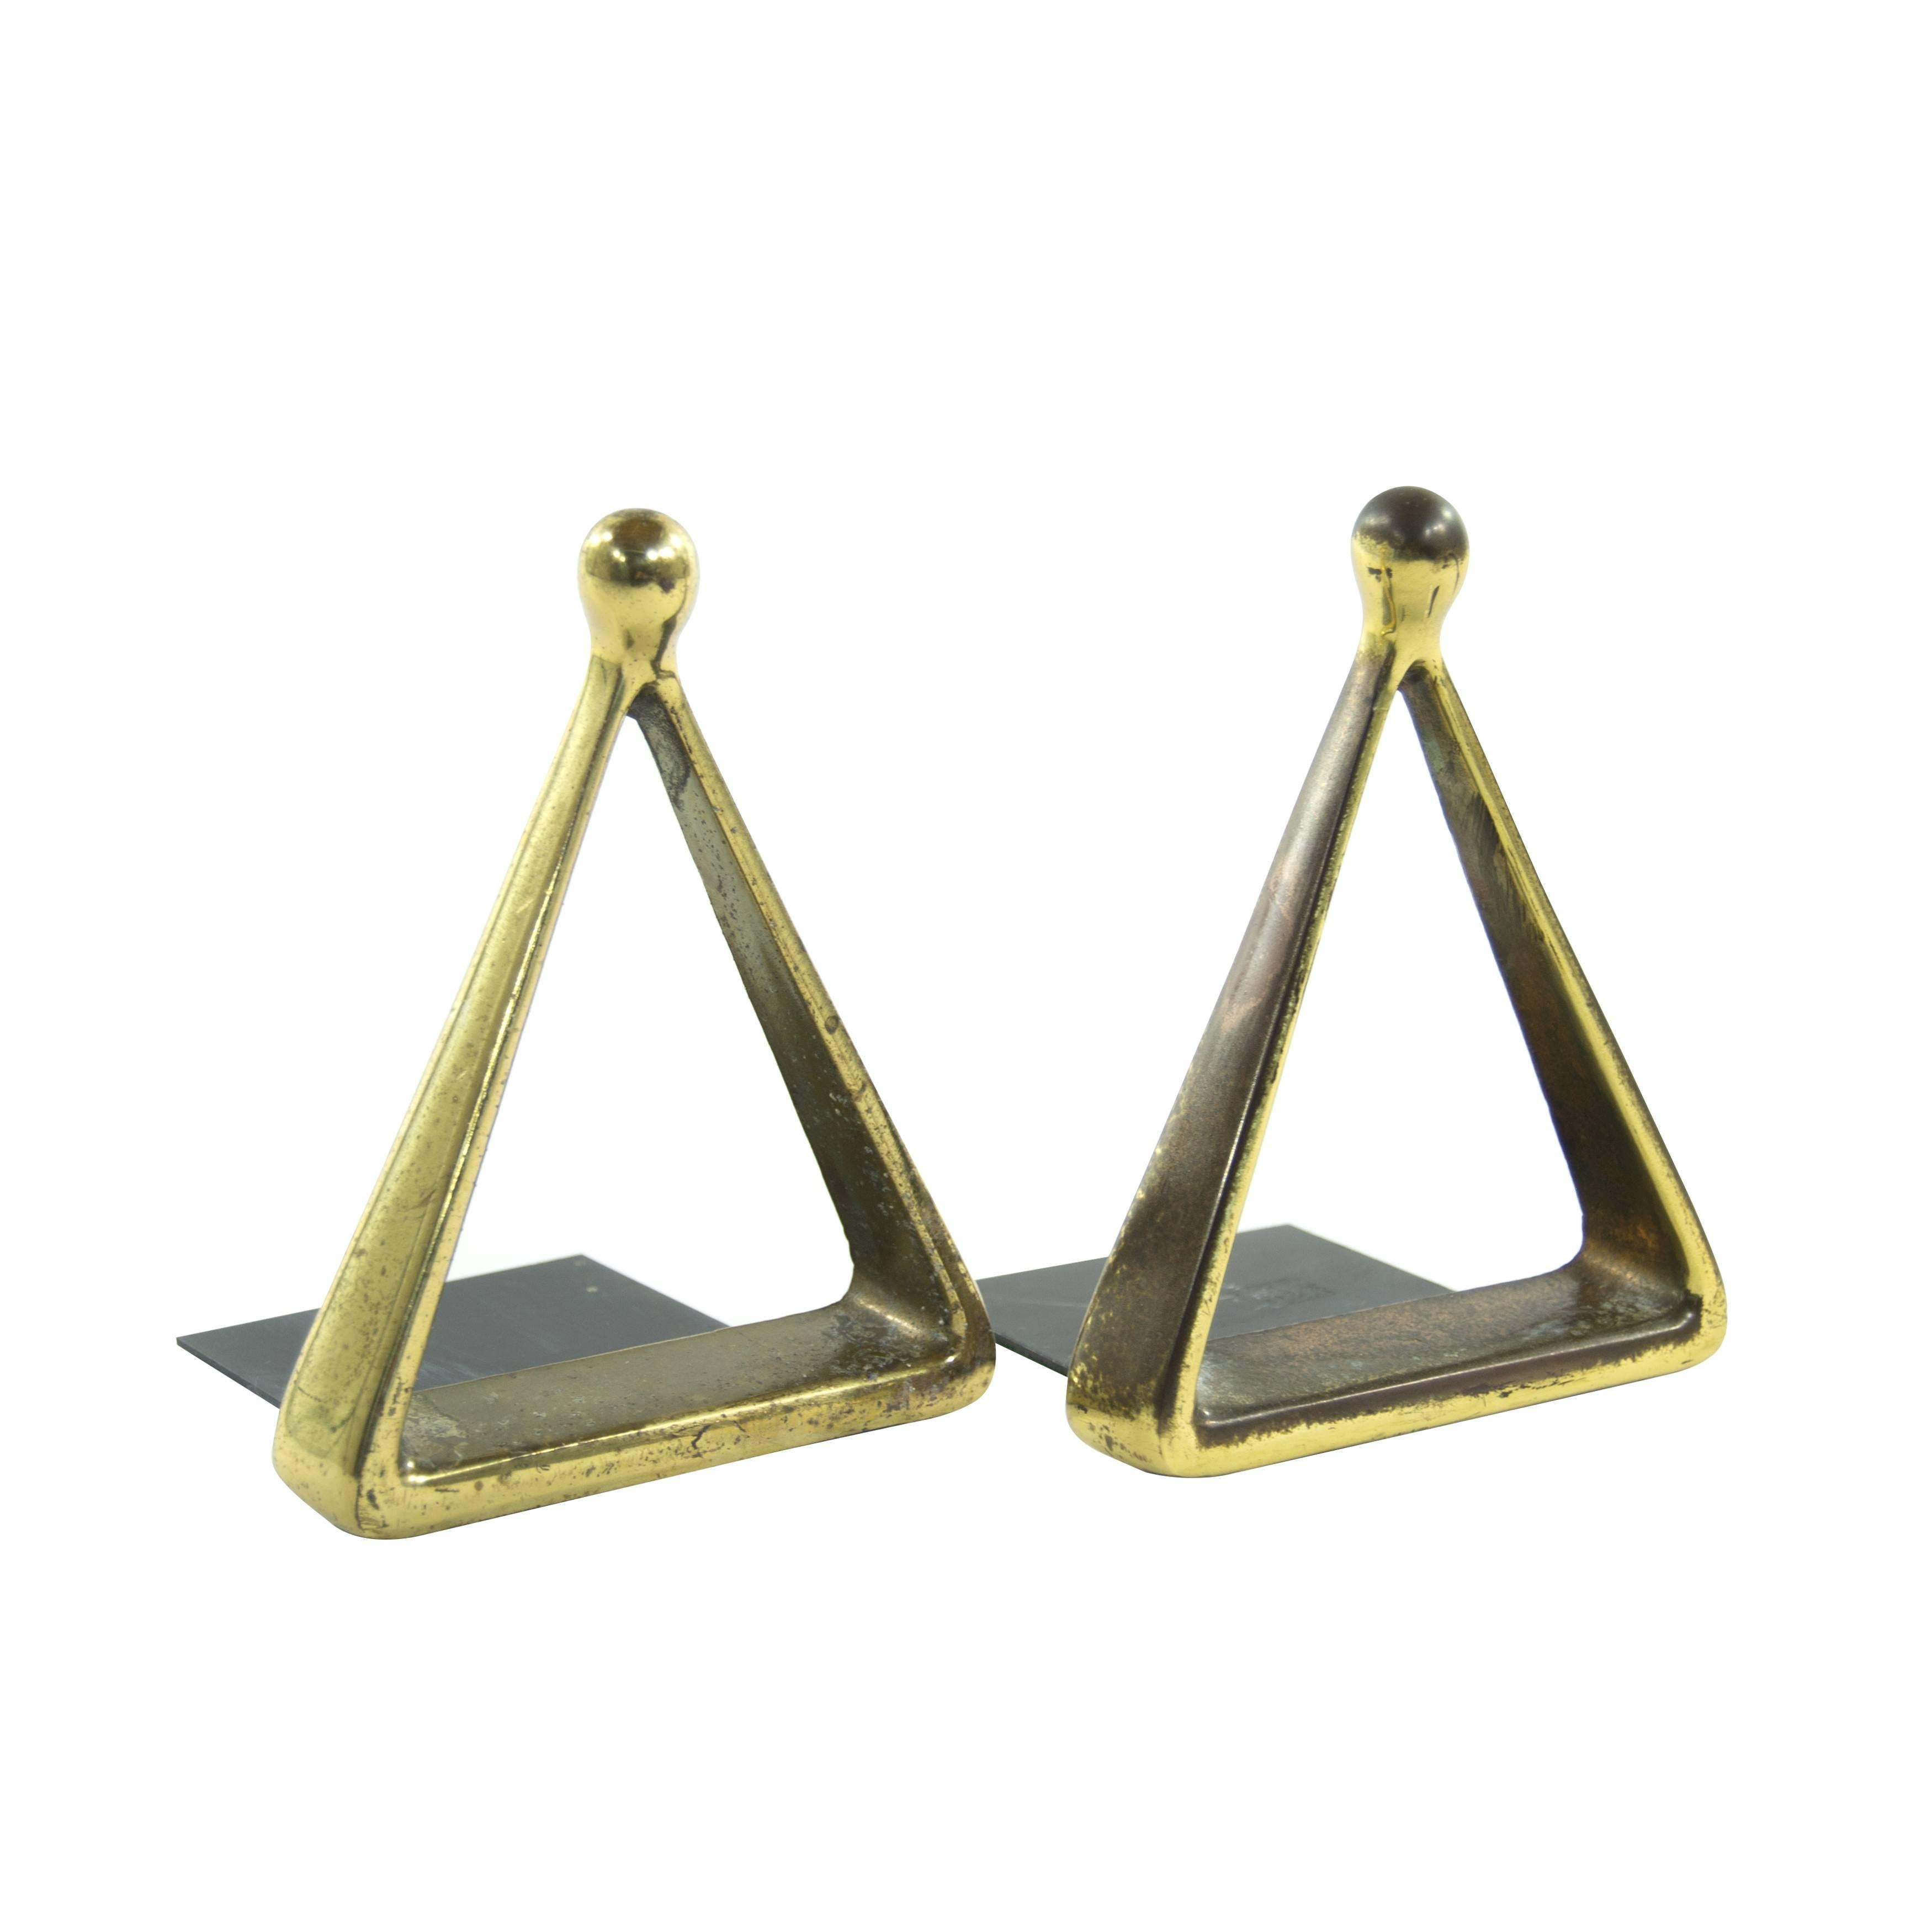 Pair of Triangular Bookends by Ben Seibel for Jenfred Ware, 1950s